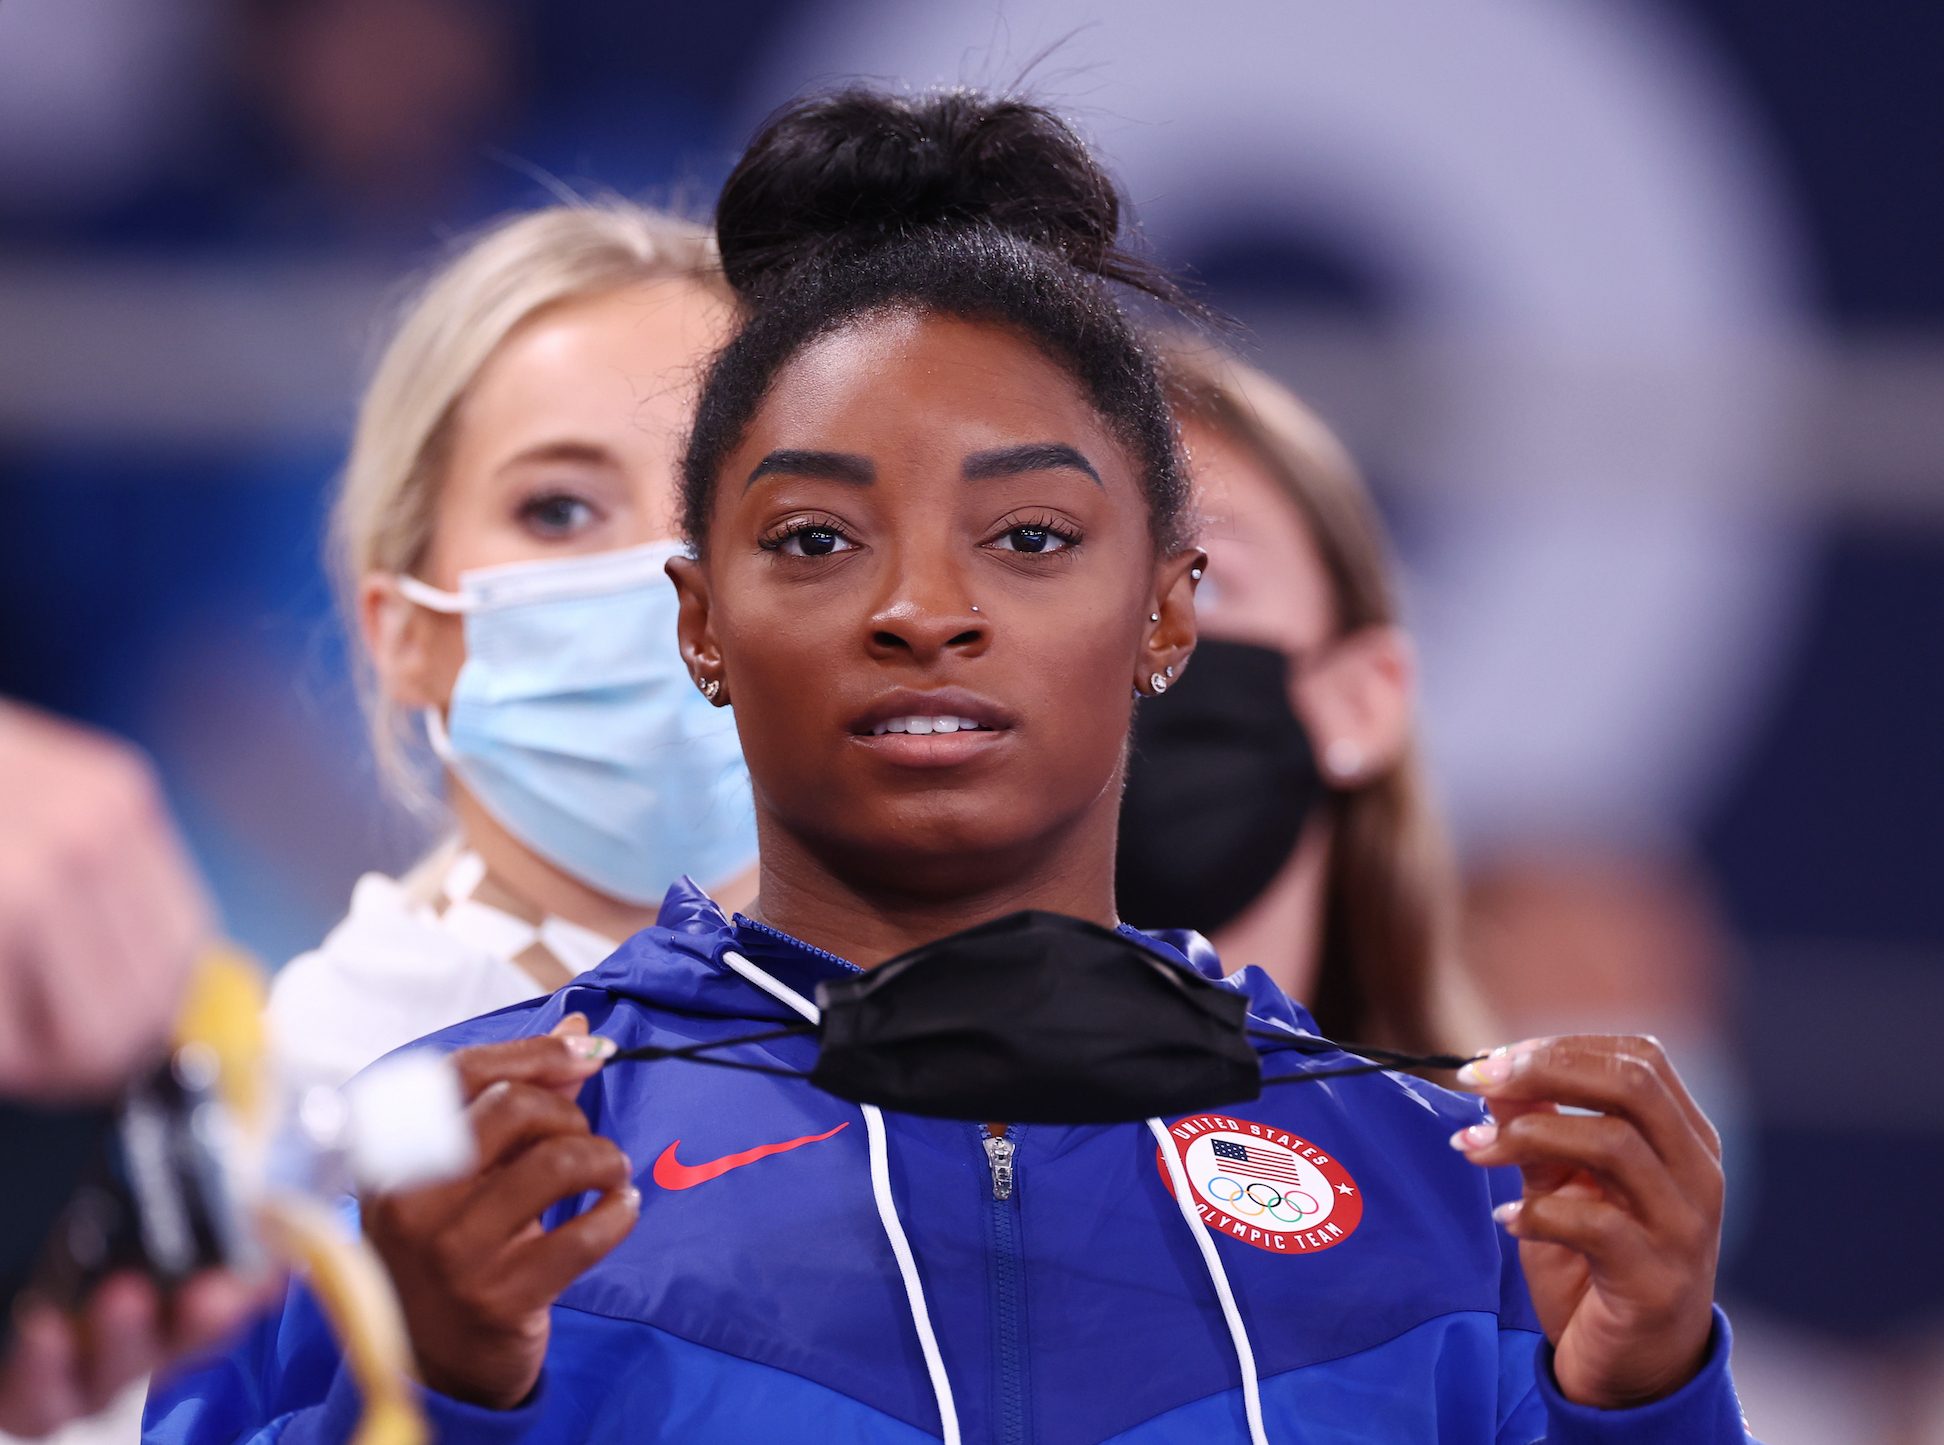 Simone Biles to compete in Tokyo Olympics balance beam final